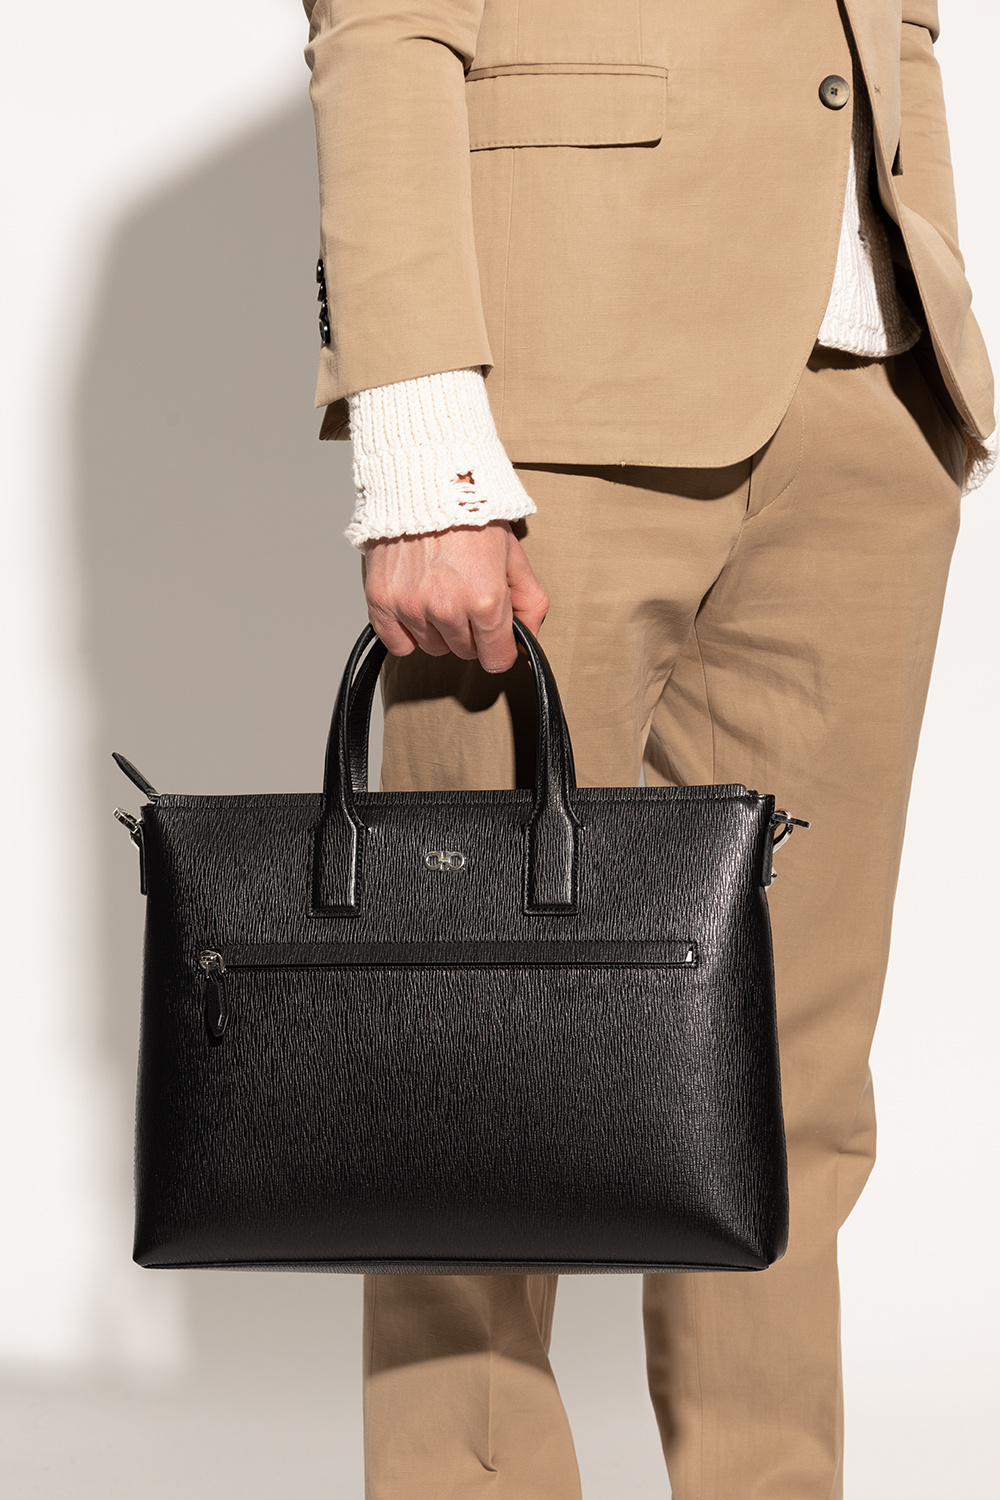 FERRAGAMO the talking with our collection of premium bags